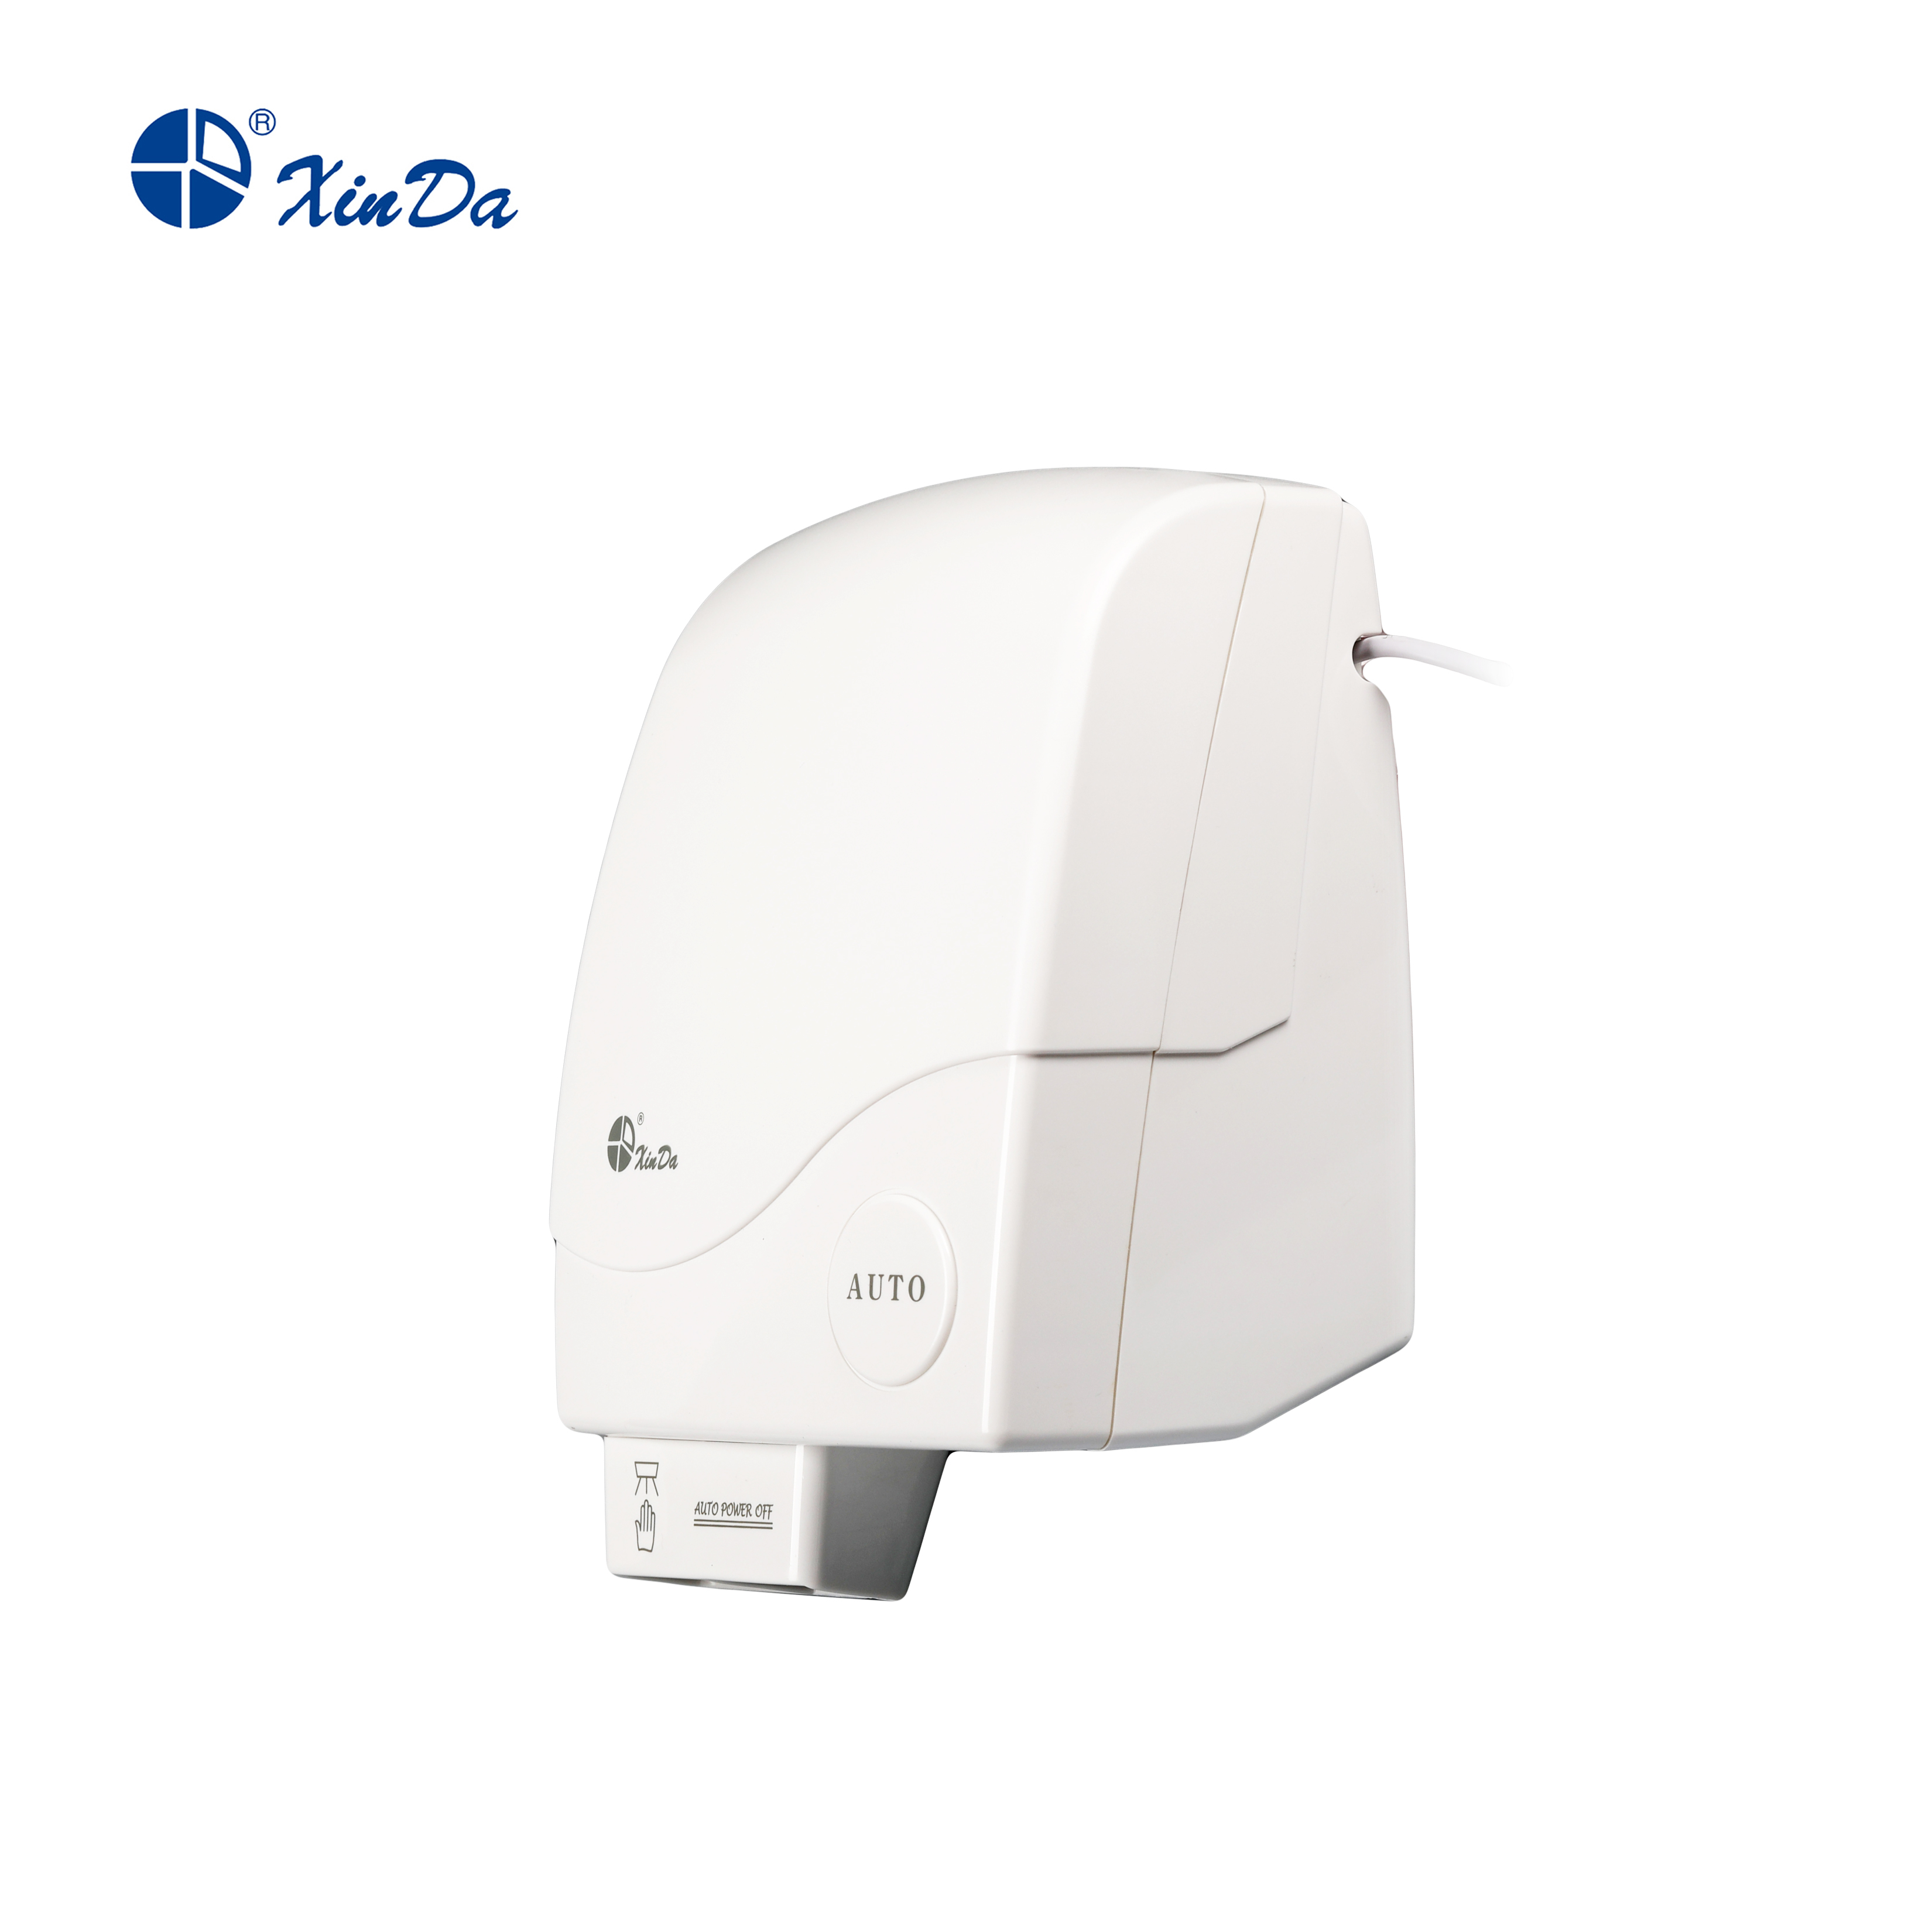 Advantages of an Automatic/Wall Mounted Hand Dryer